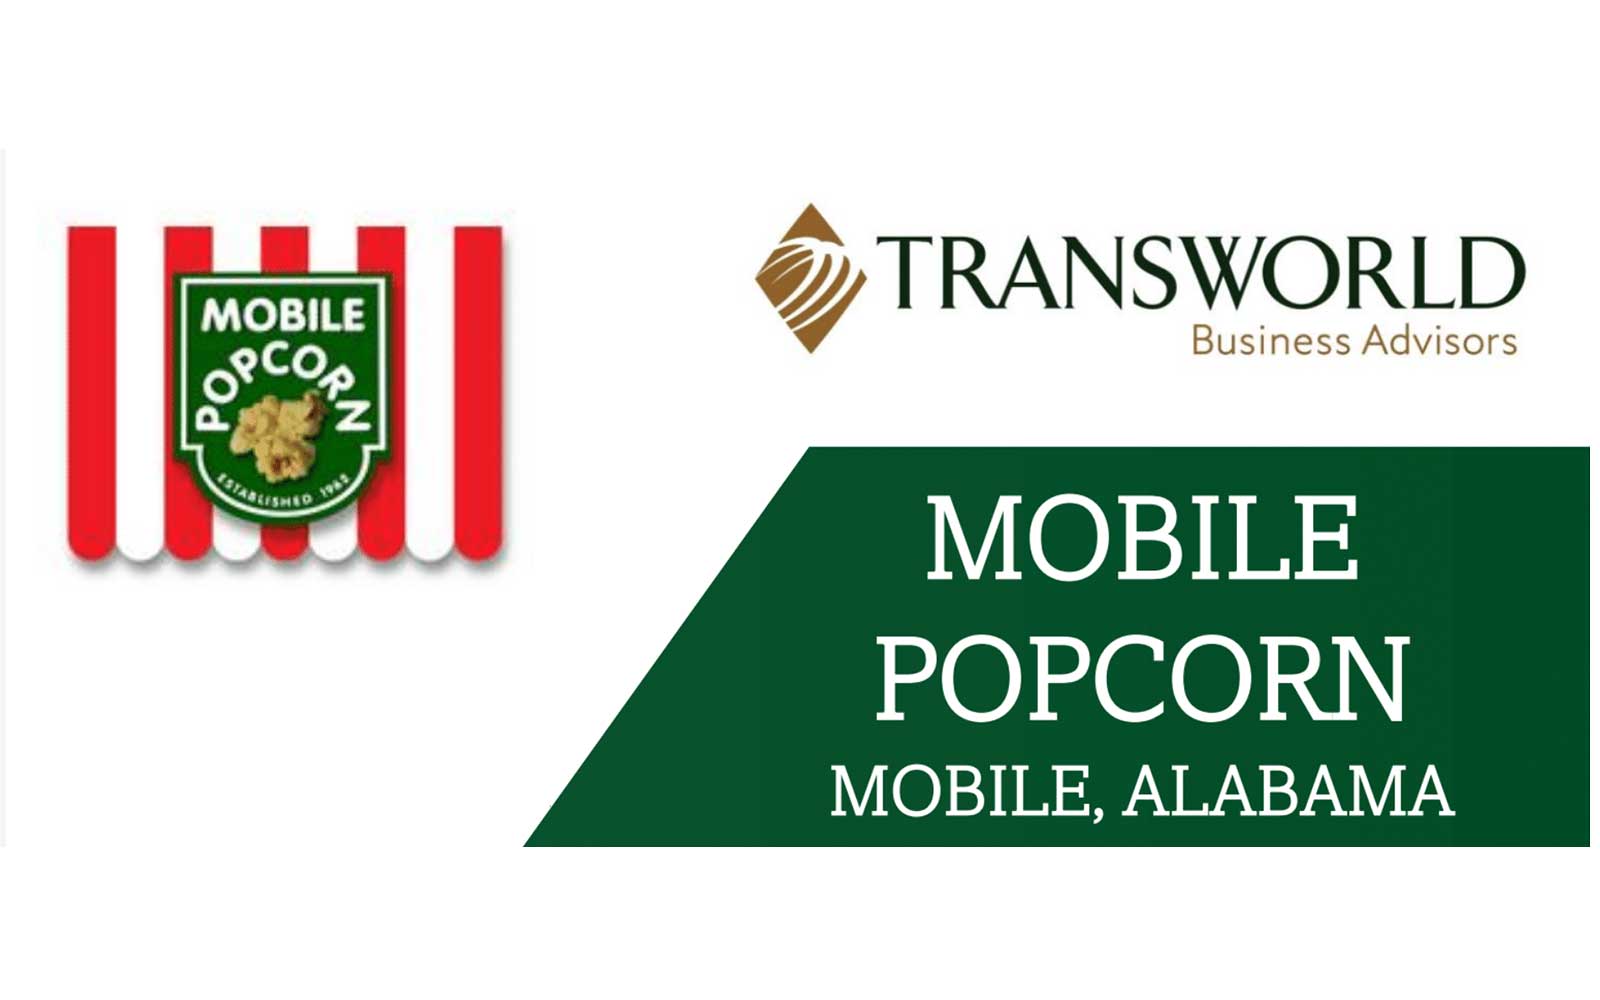 Mobile Popcorn Party Rentals Is Restructuring 